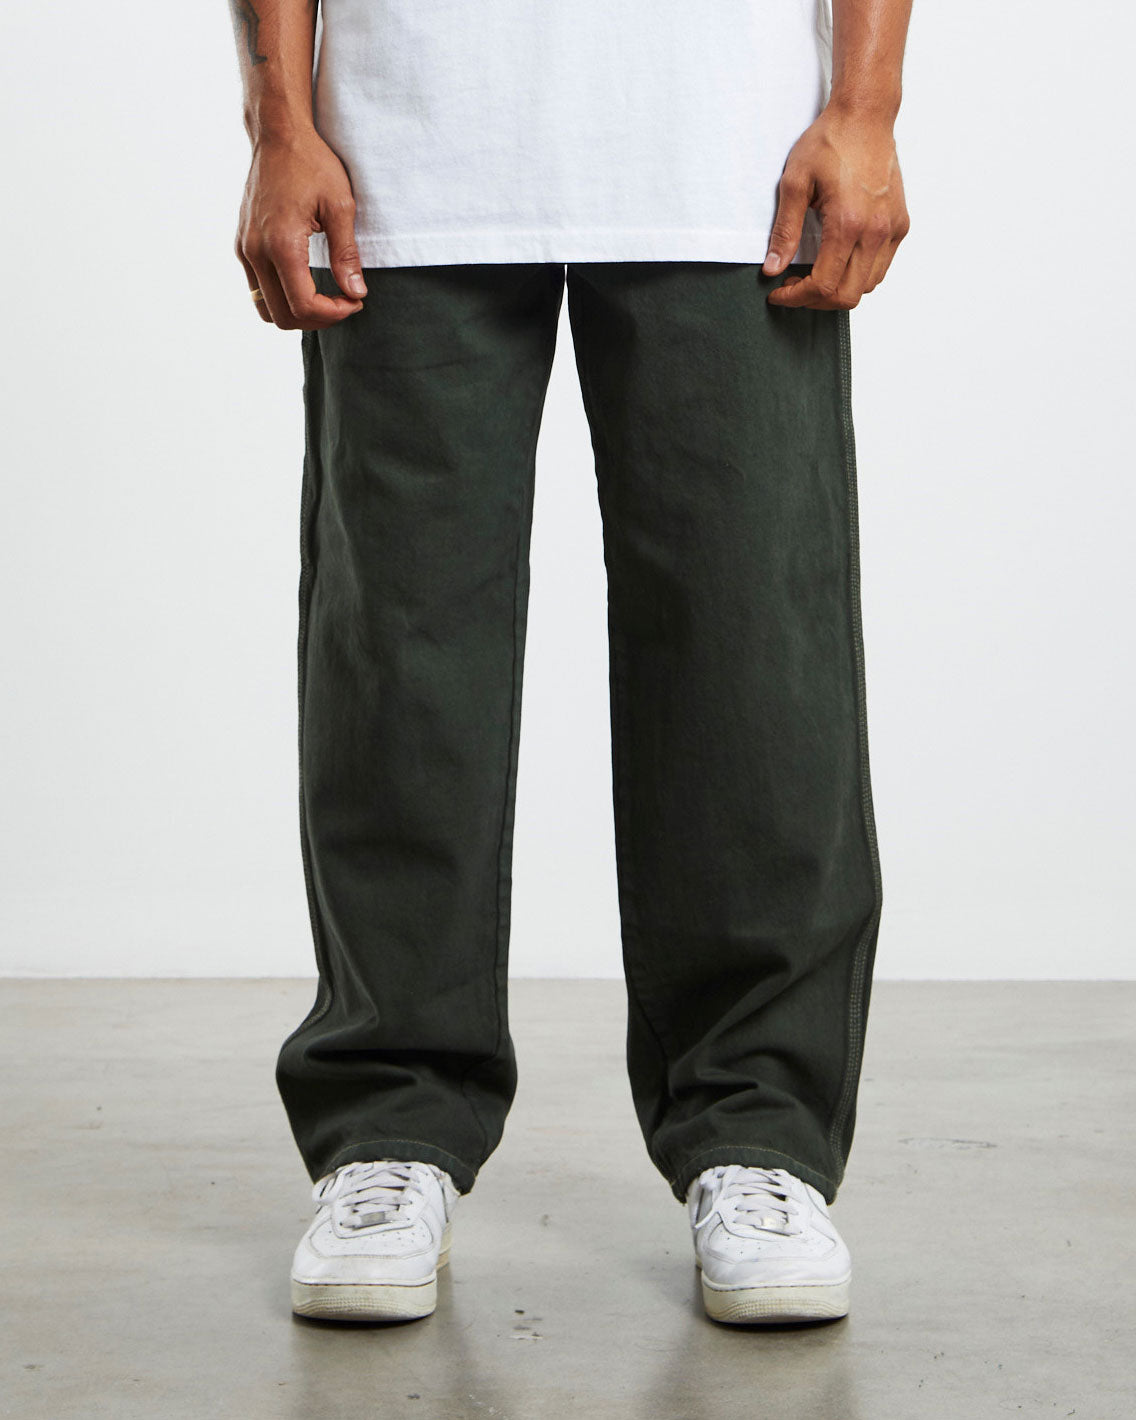 Dickies - Relaxed Fit Carpenter Duck Jean - Rinsed Moss